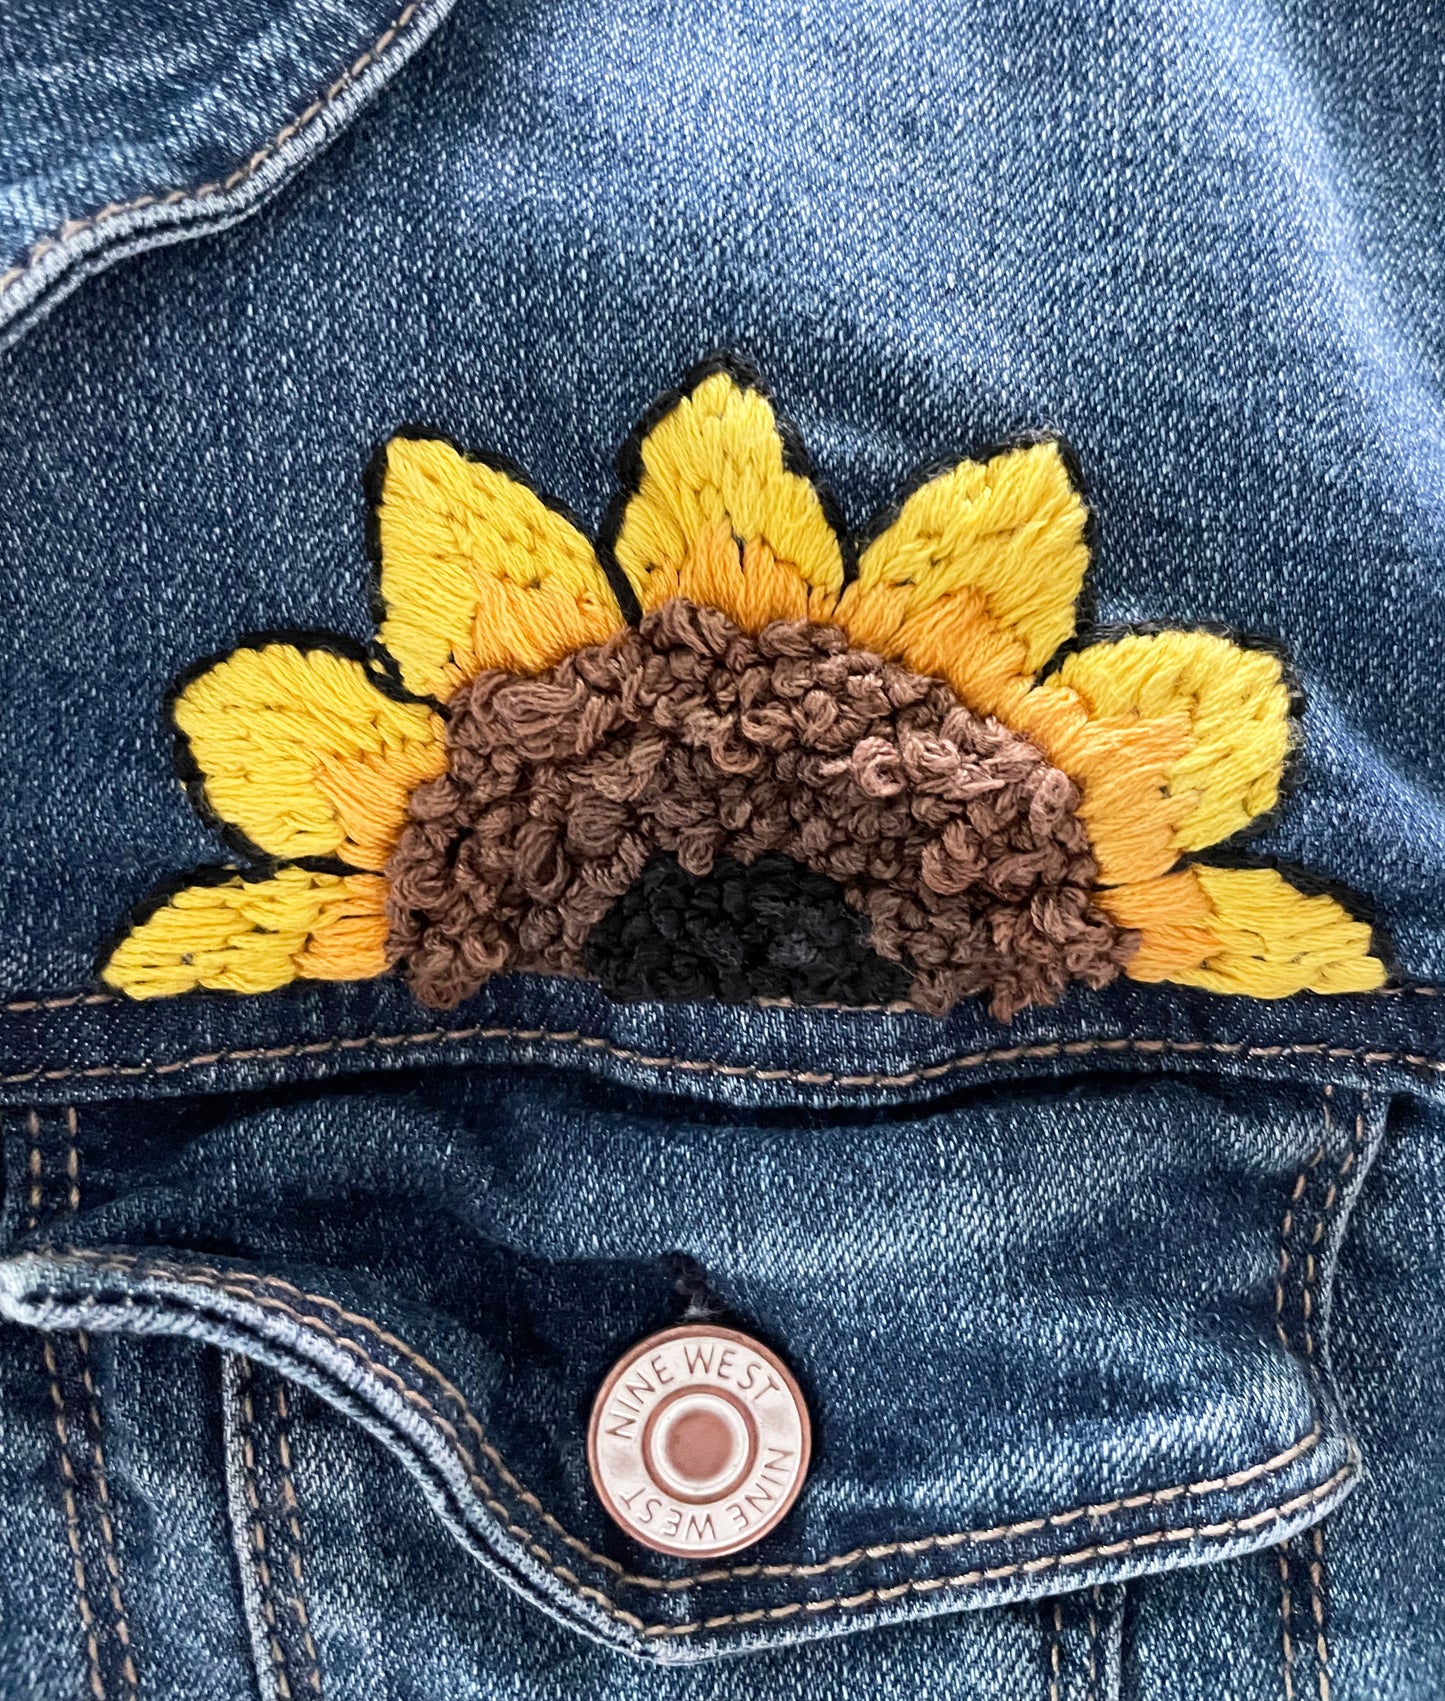 Jean Jacket - Adult (hand embroidered)